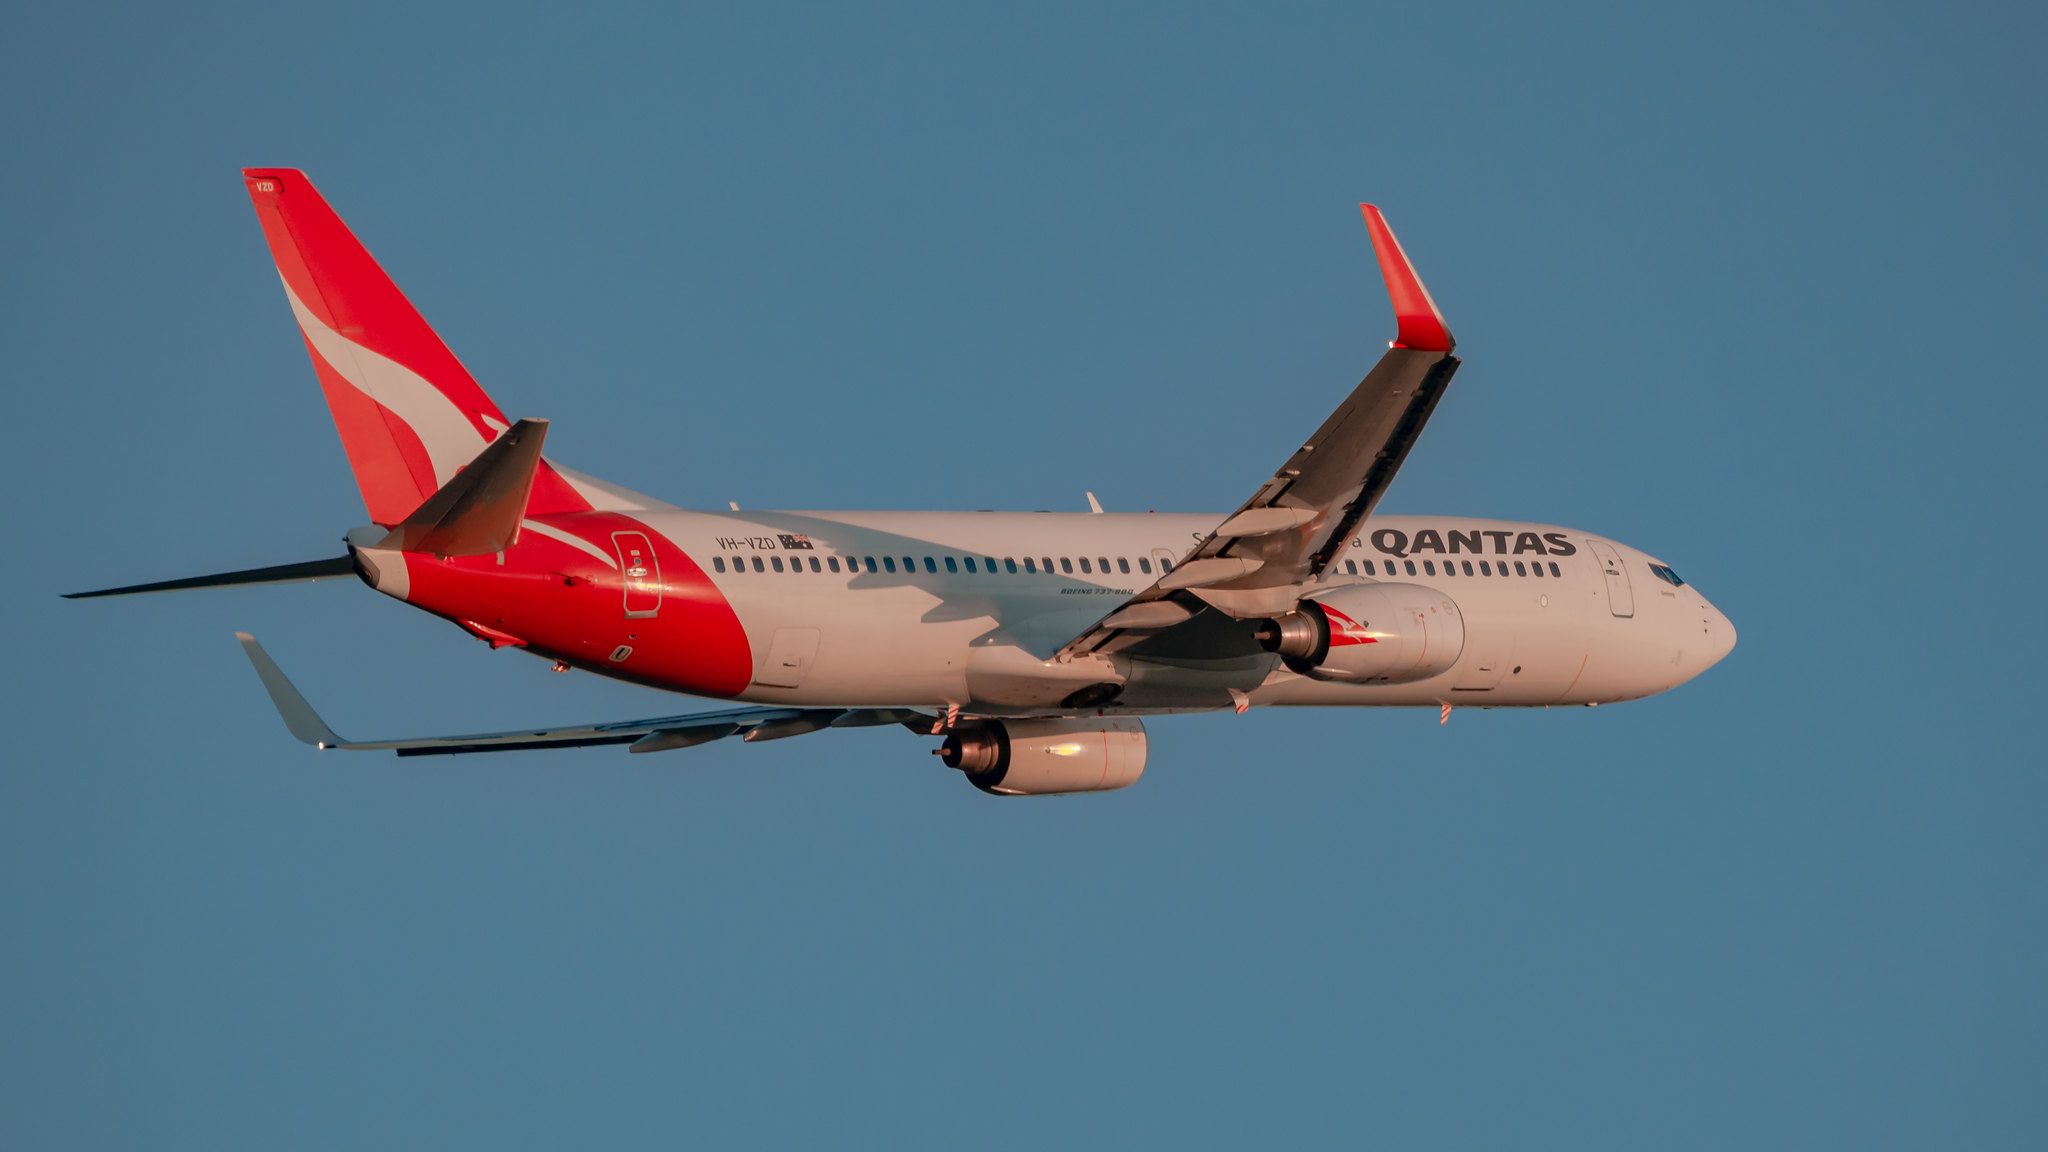 A Qantas aircraft flying in the sky.